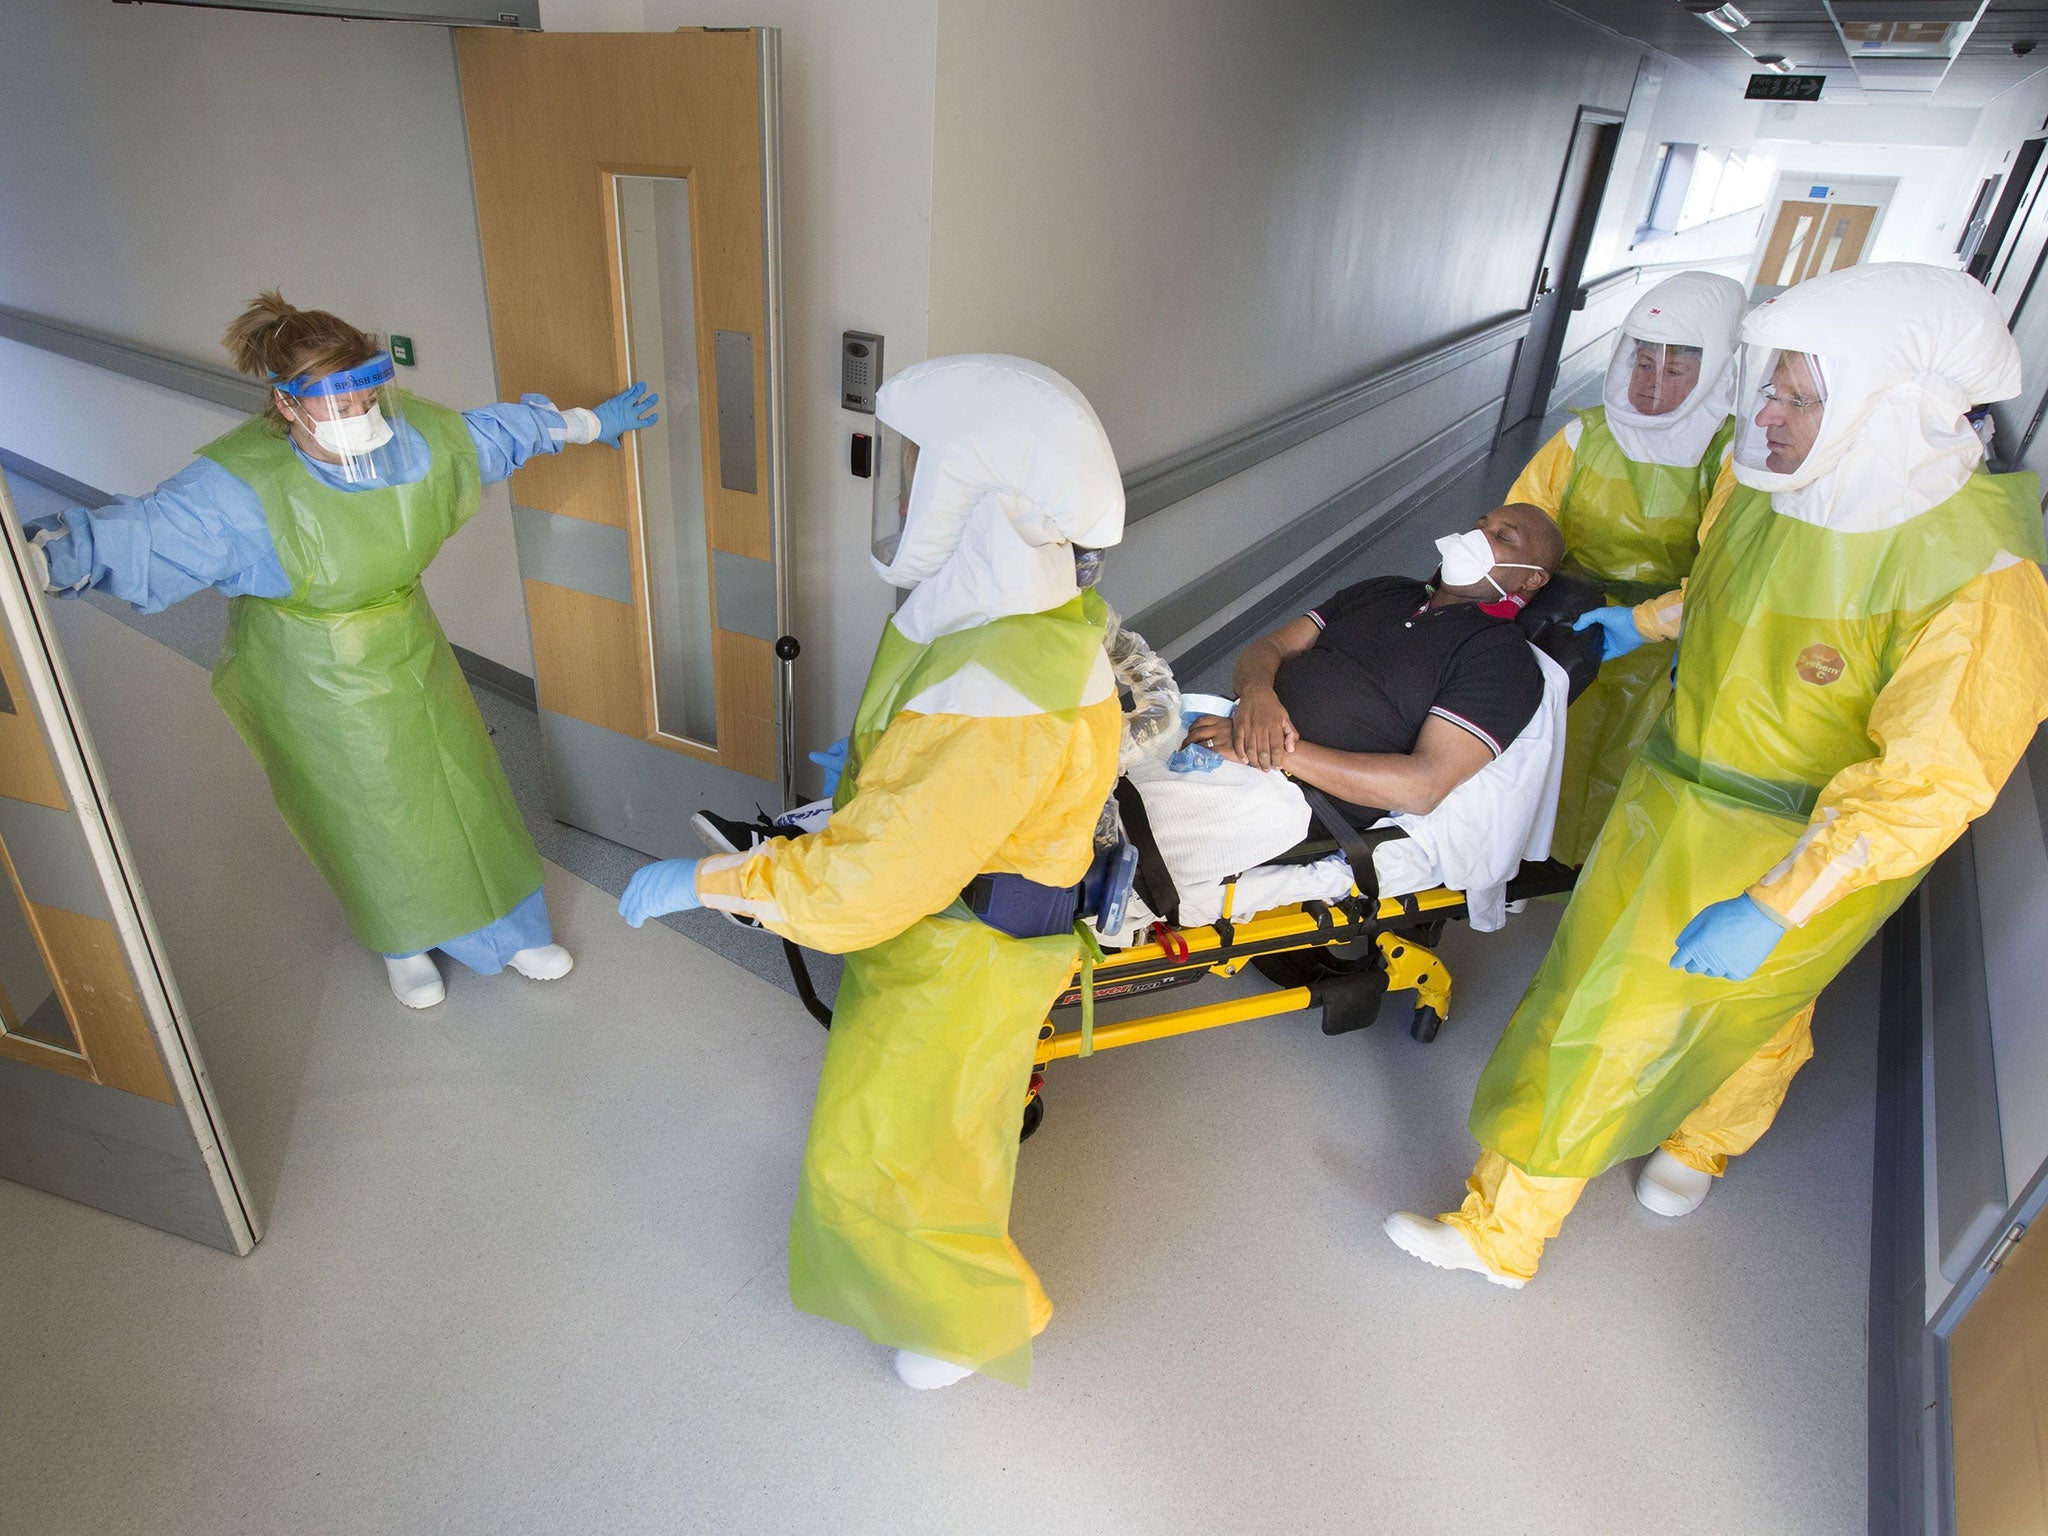 Staff from North East Ambulance Service and the Royal Victoria Infirmary, Newcastle take part national exercise to test Britain's readiness for an Ebola outbreak.